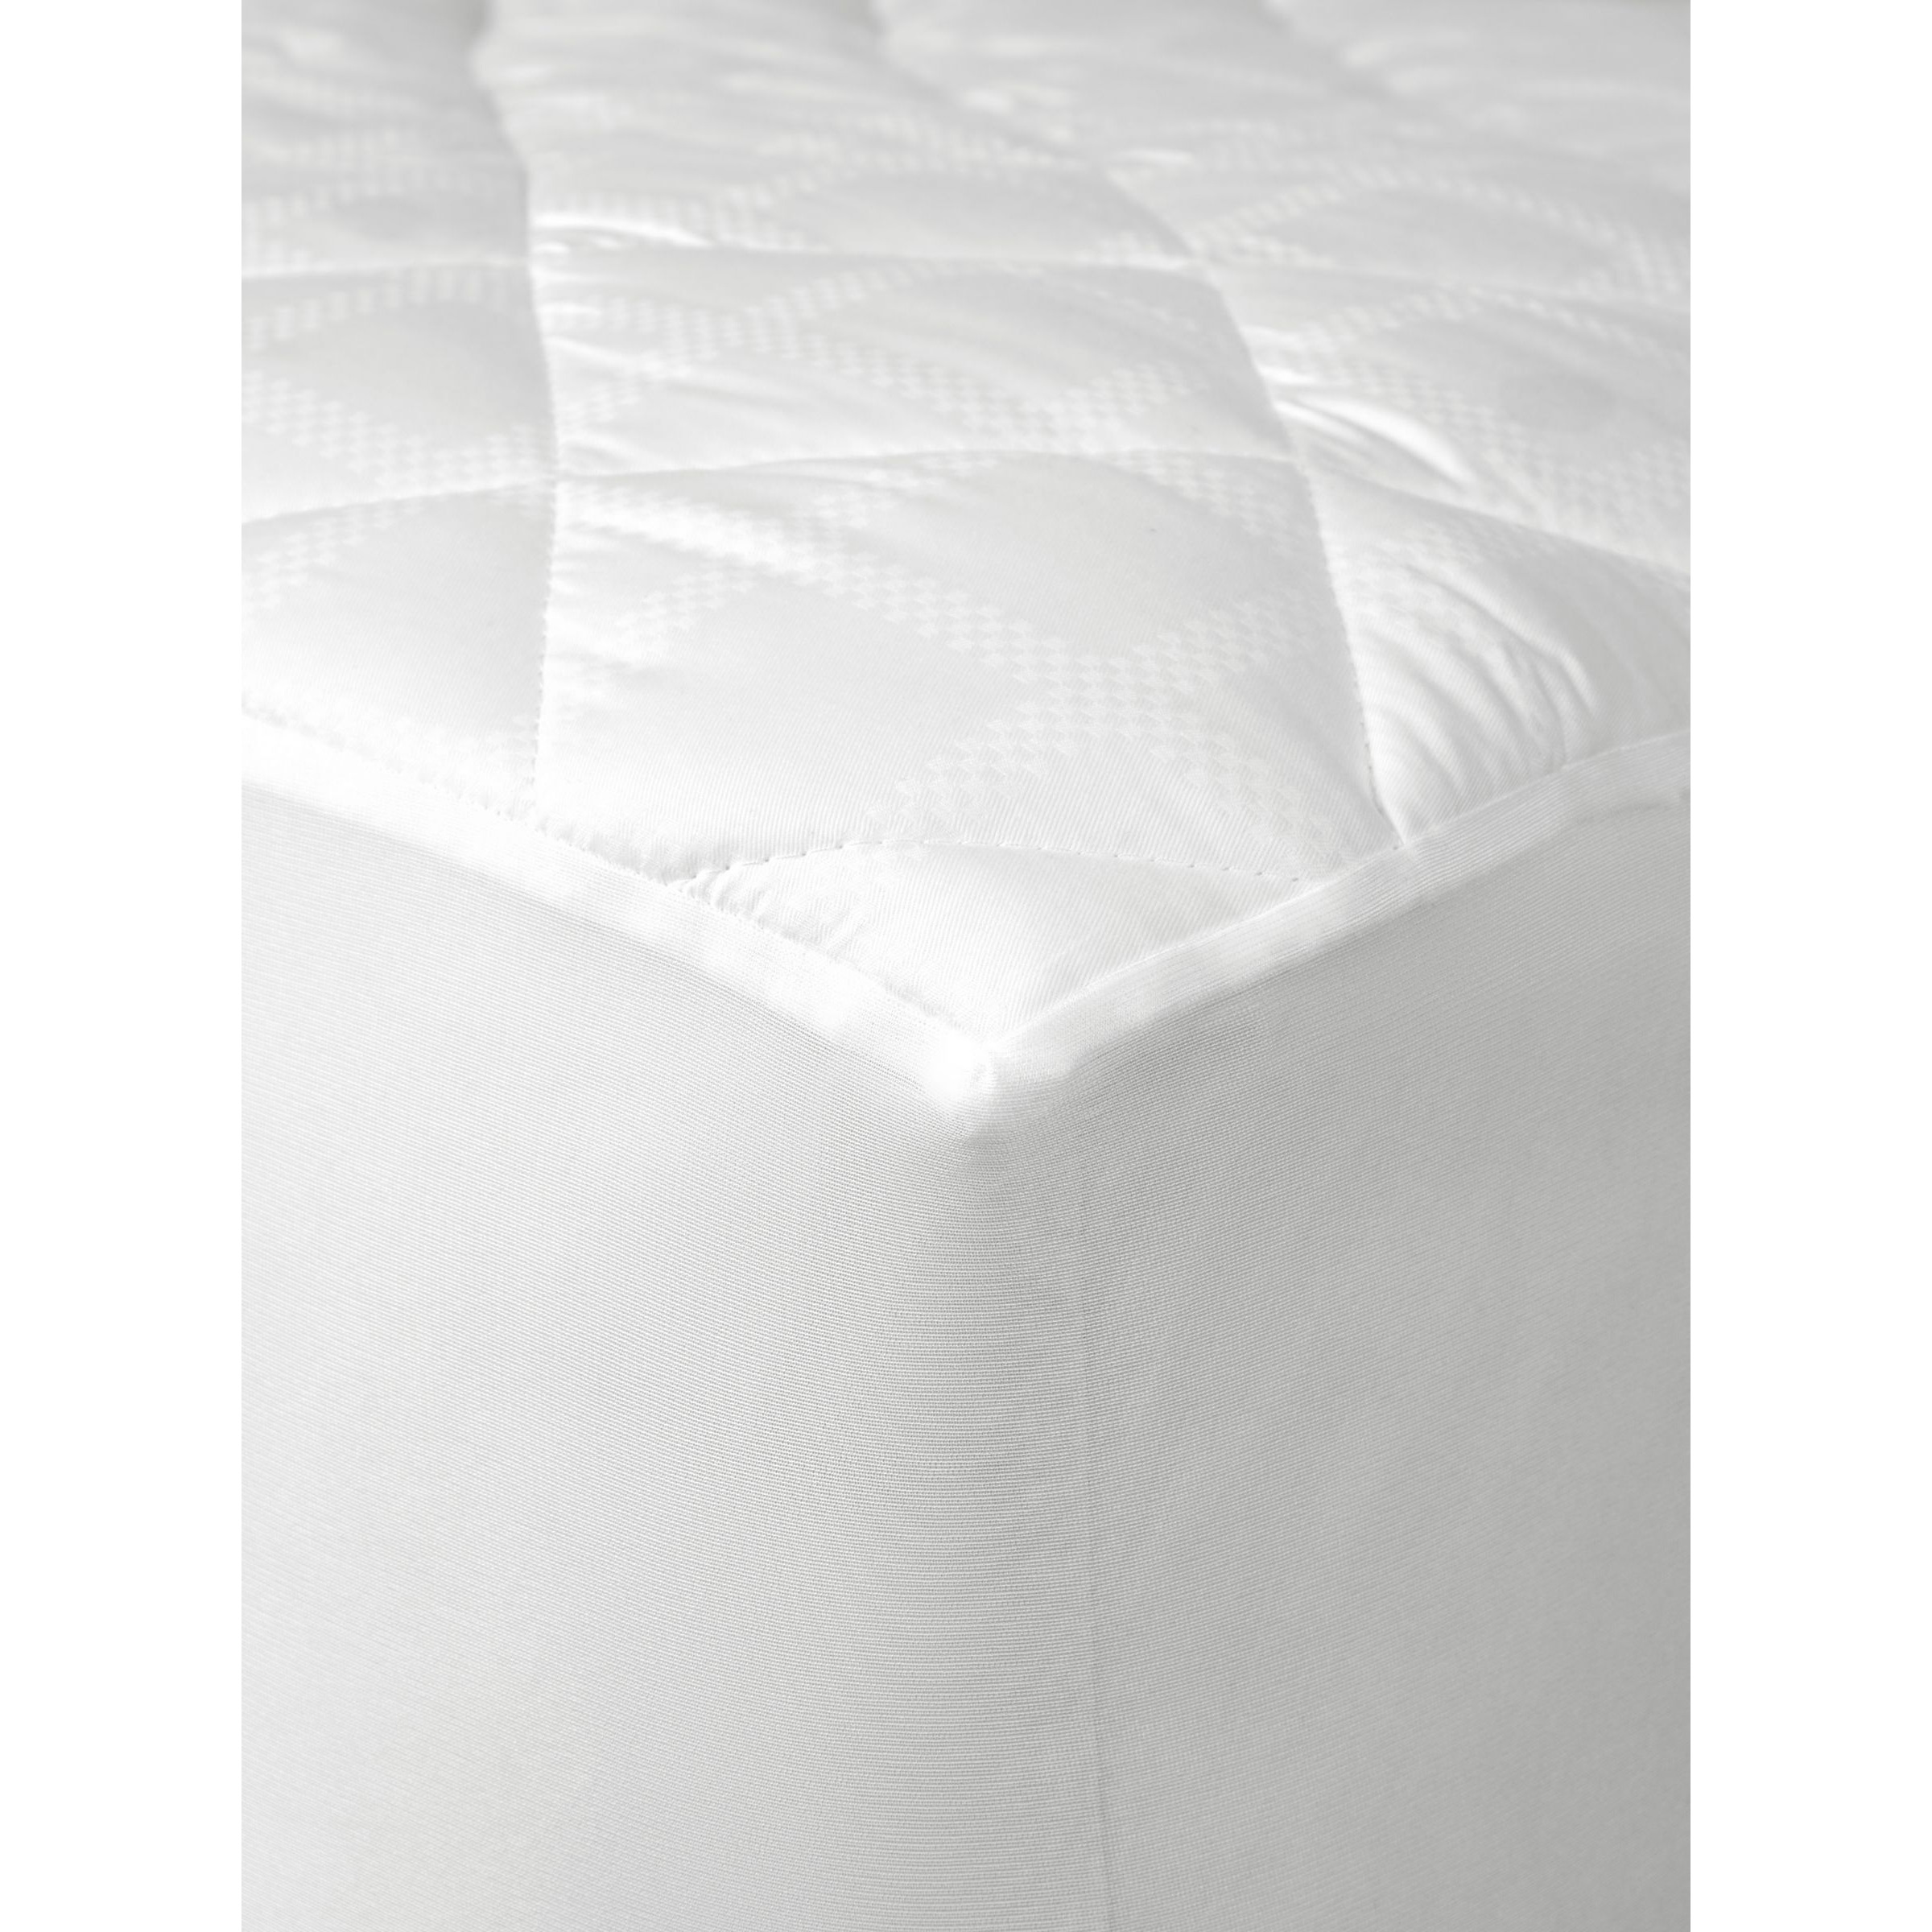 John Lewis Specialist Synthetic Active Anti-Allergy Mattress Protector with Plant-Based Treatment